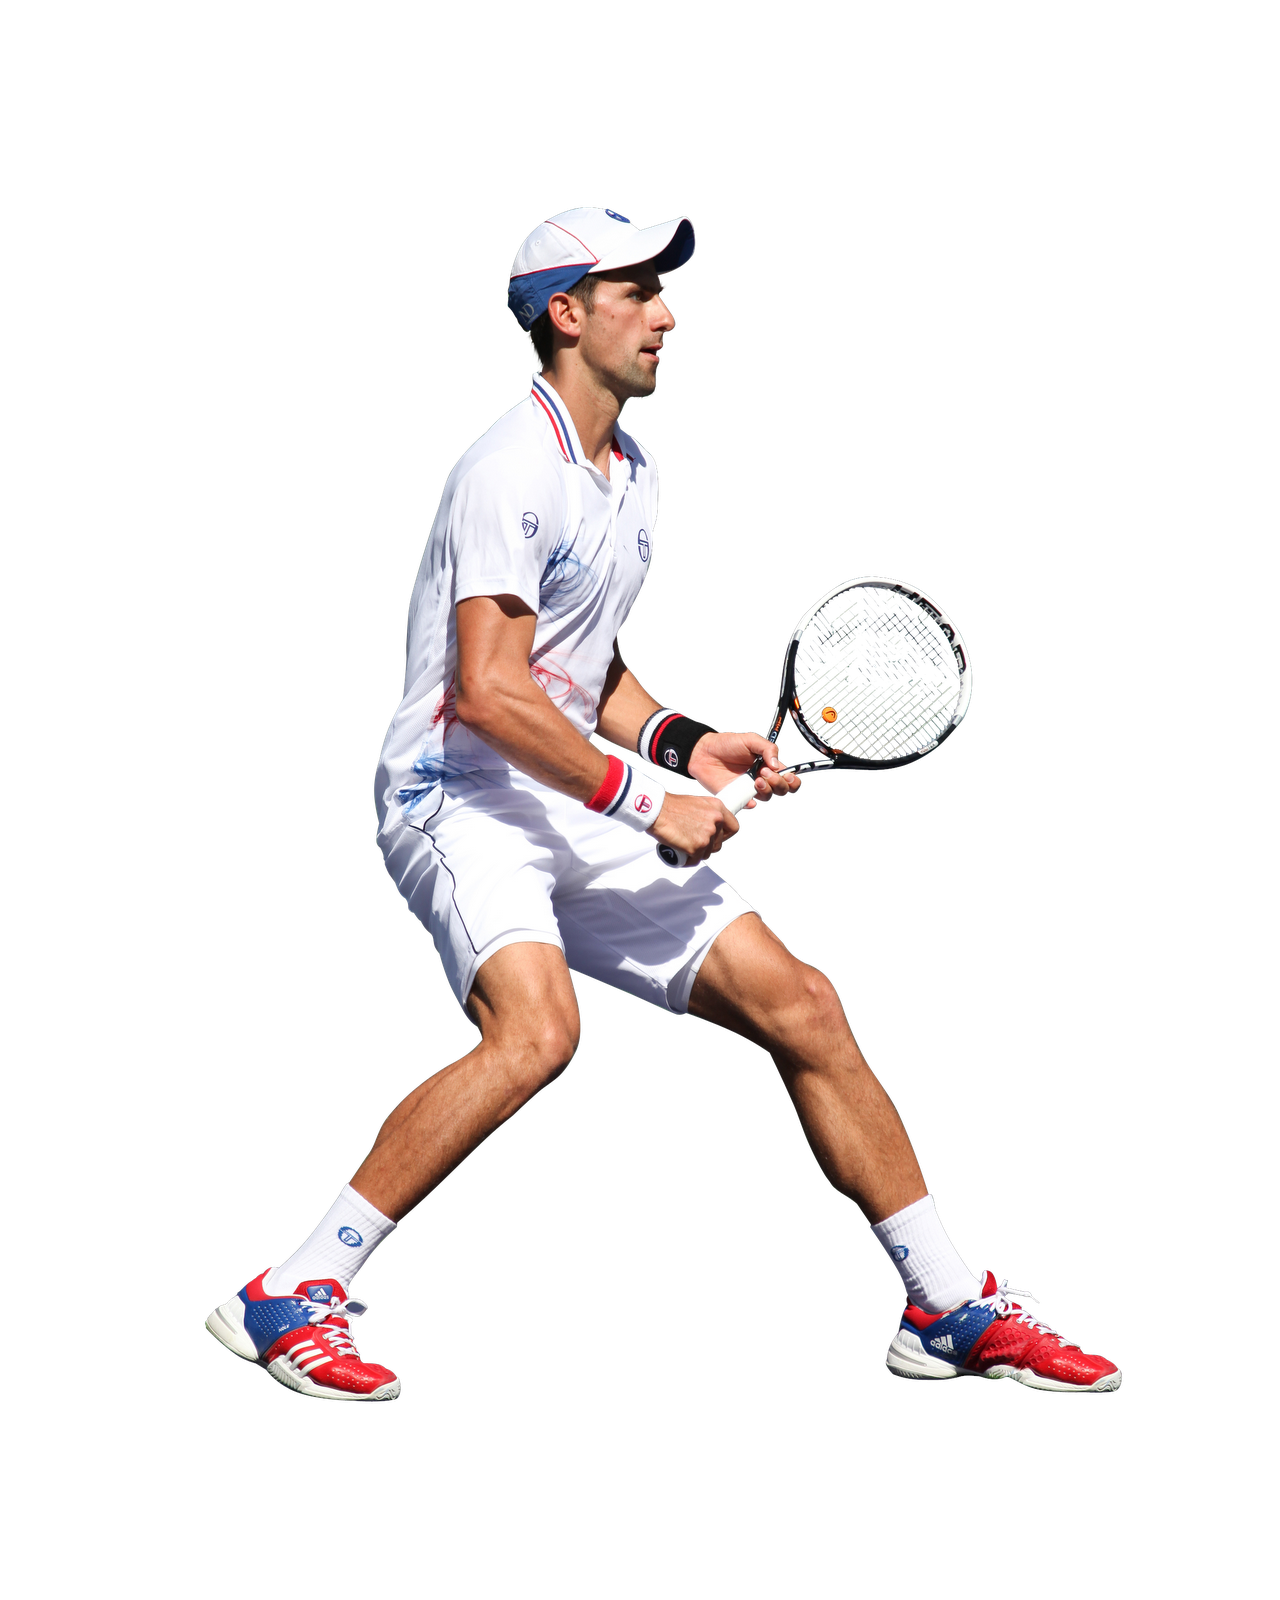 Download Novak Djokovic Photo HQ PNG Image in different resolution ...